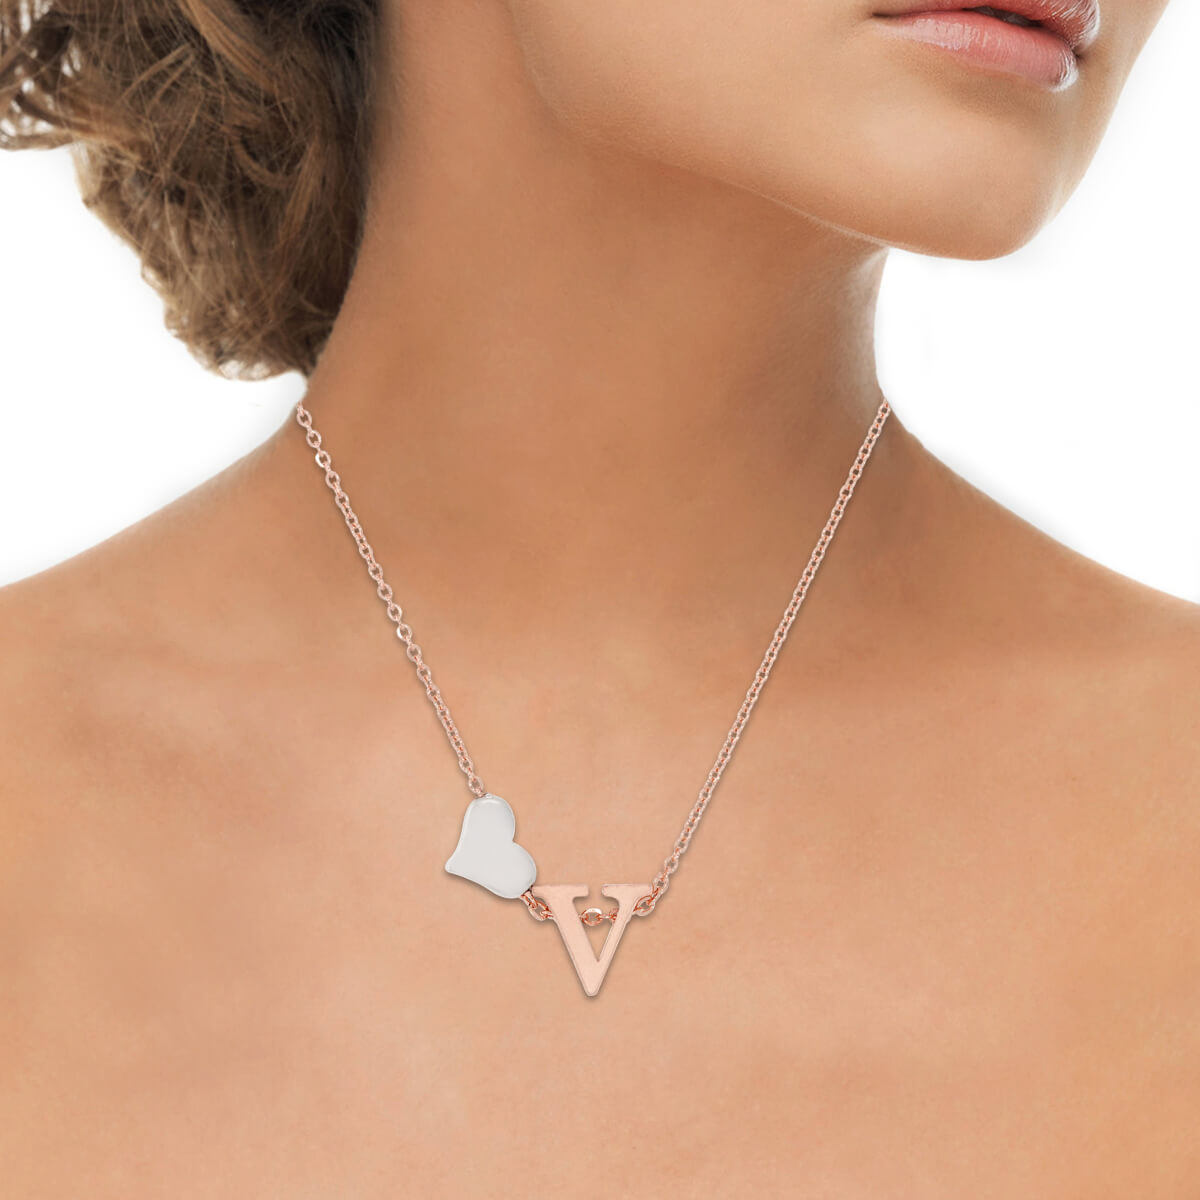 Sterling Silver "V" Initial Necklace